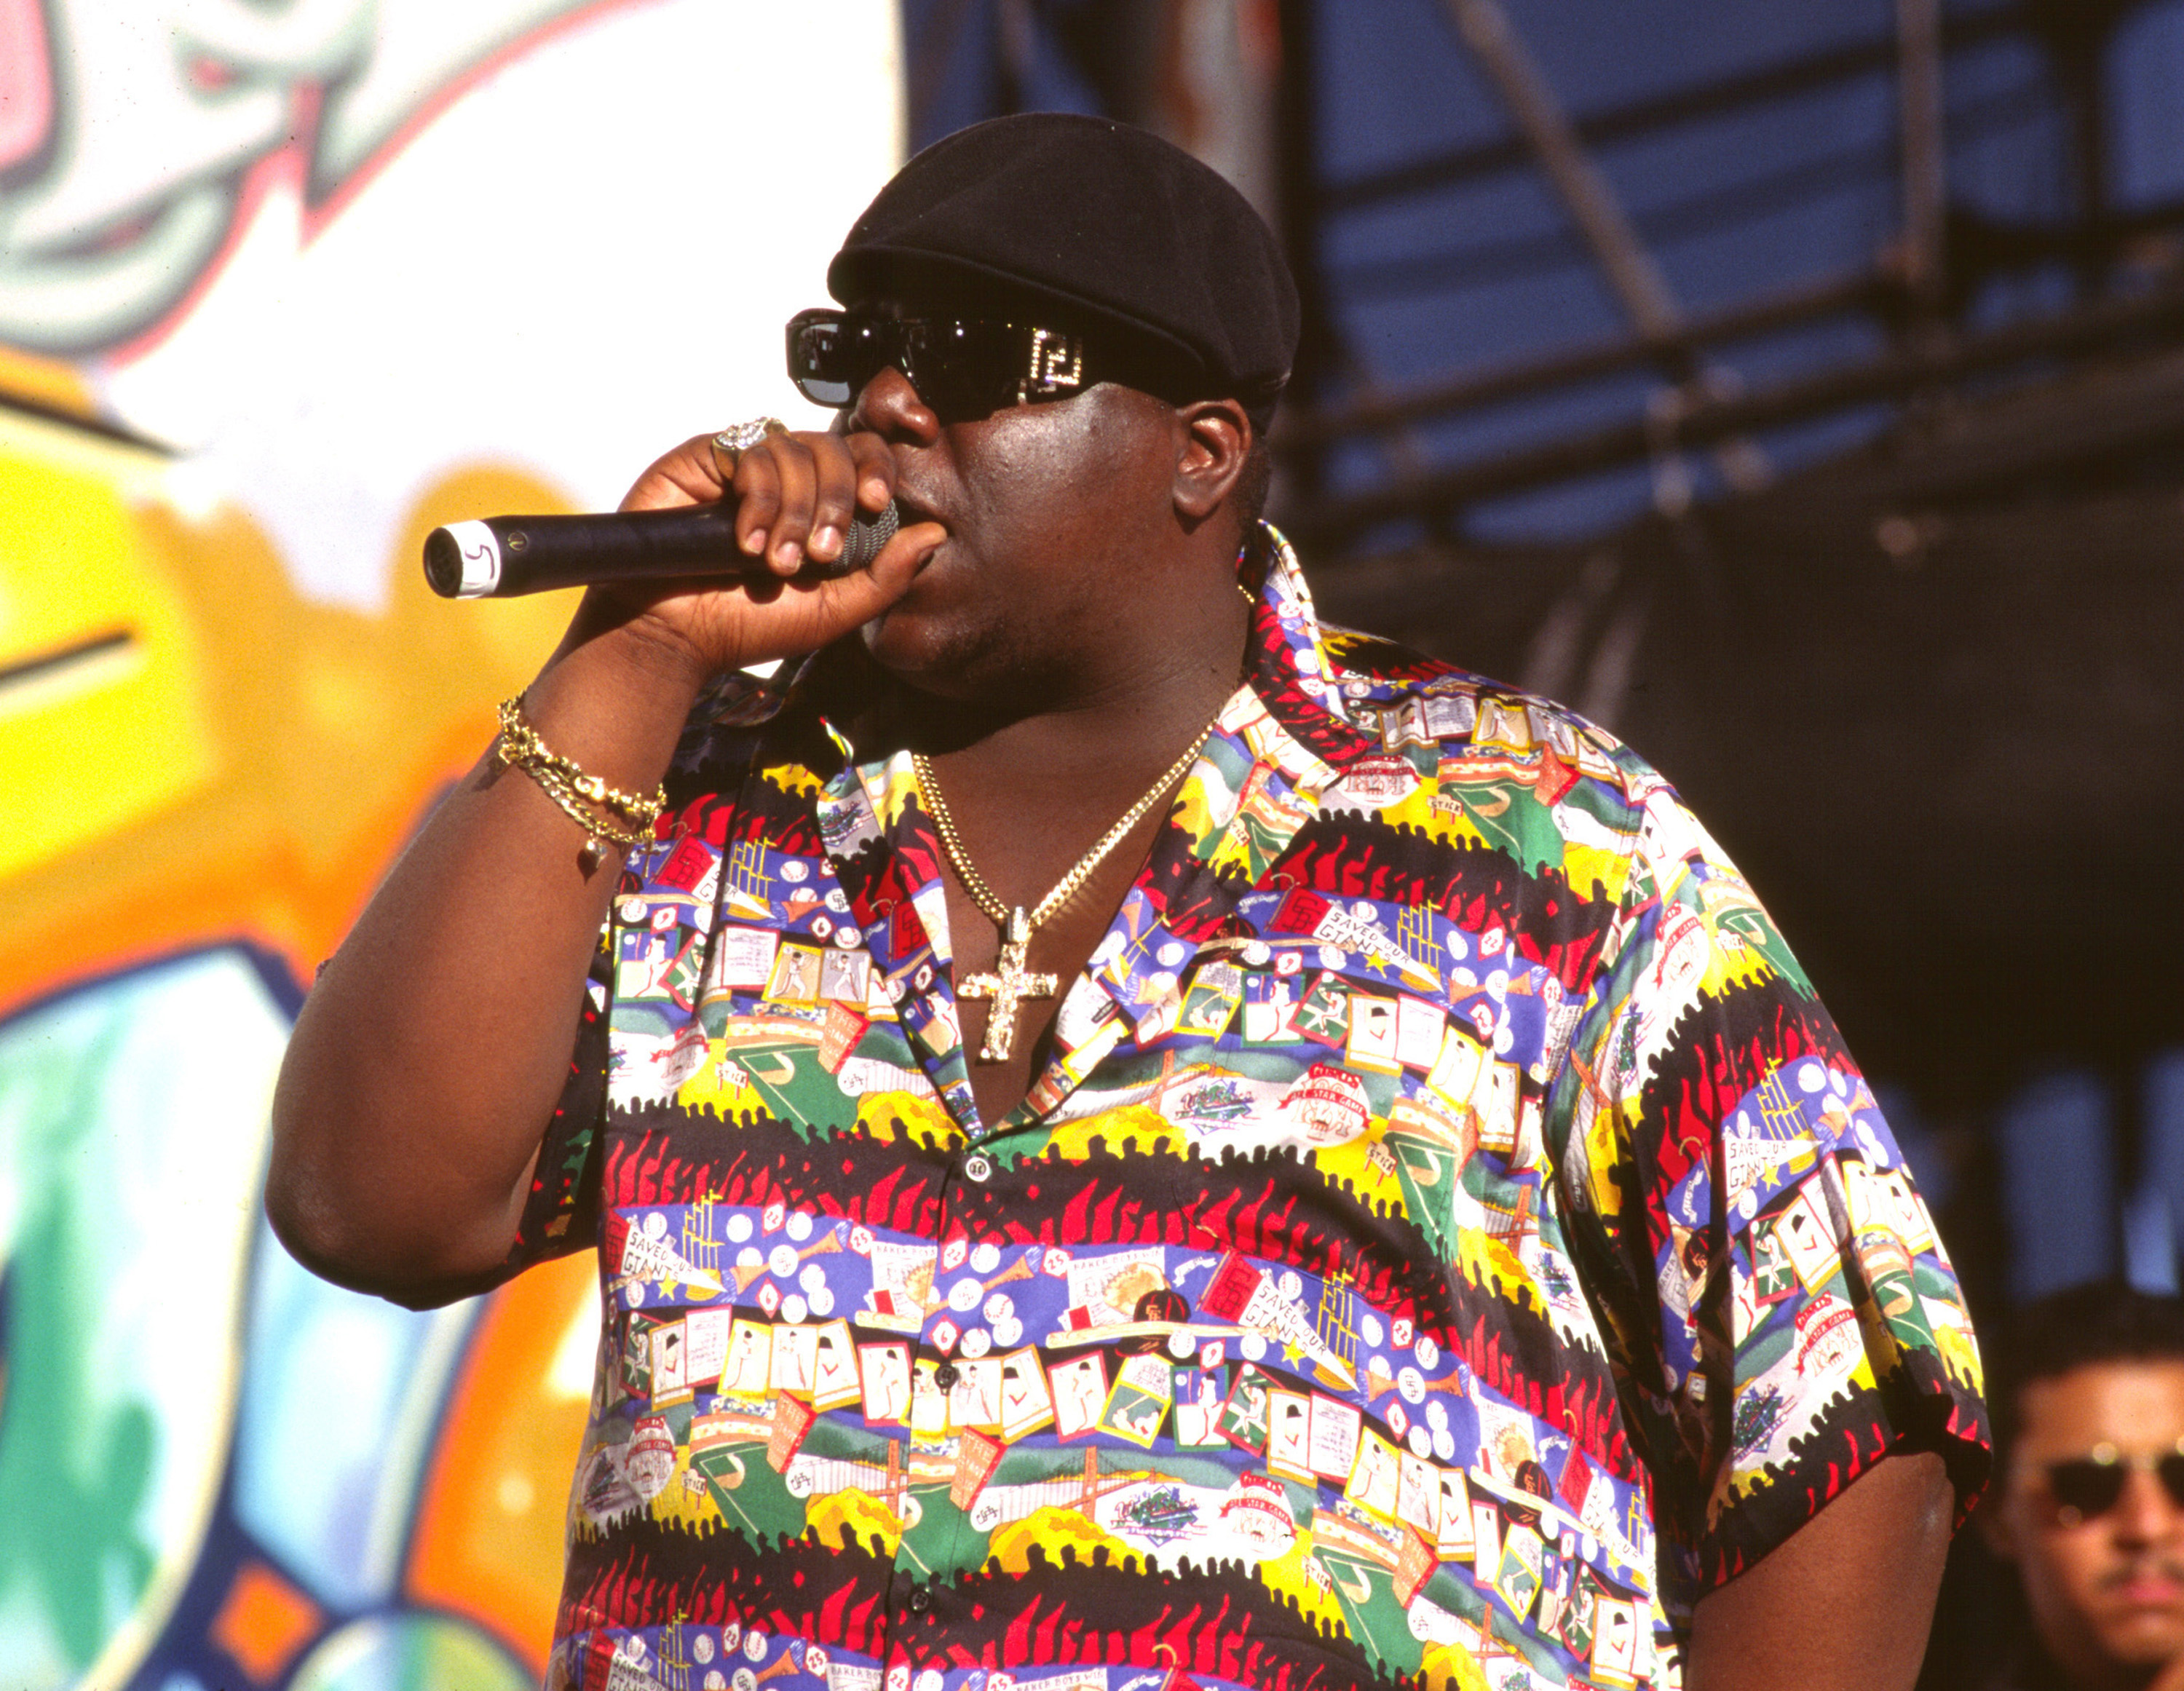 The Baby From The Notorious B.I.G’s “Ready To Die” Album Cover Is All Grown Up Now